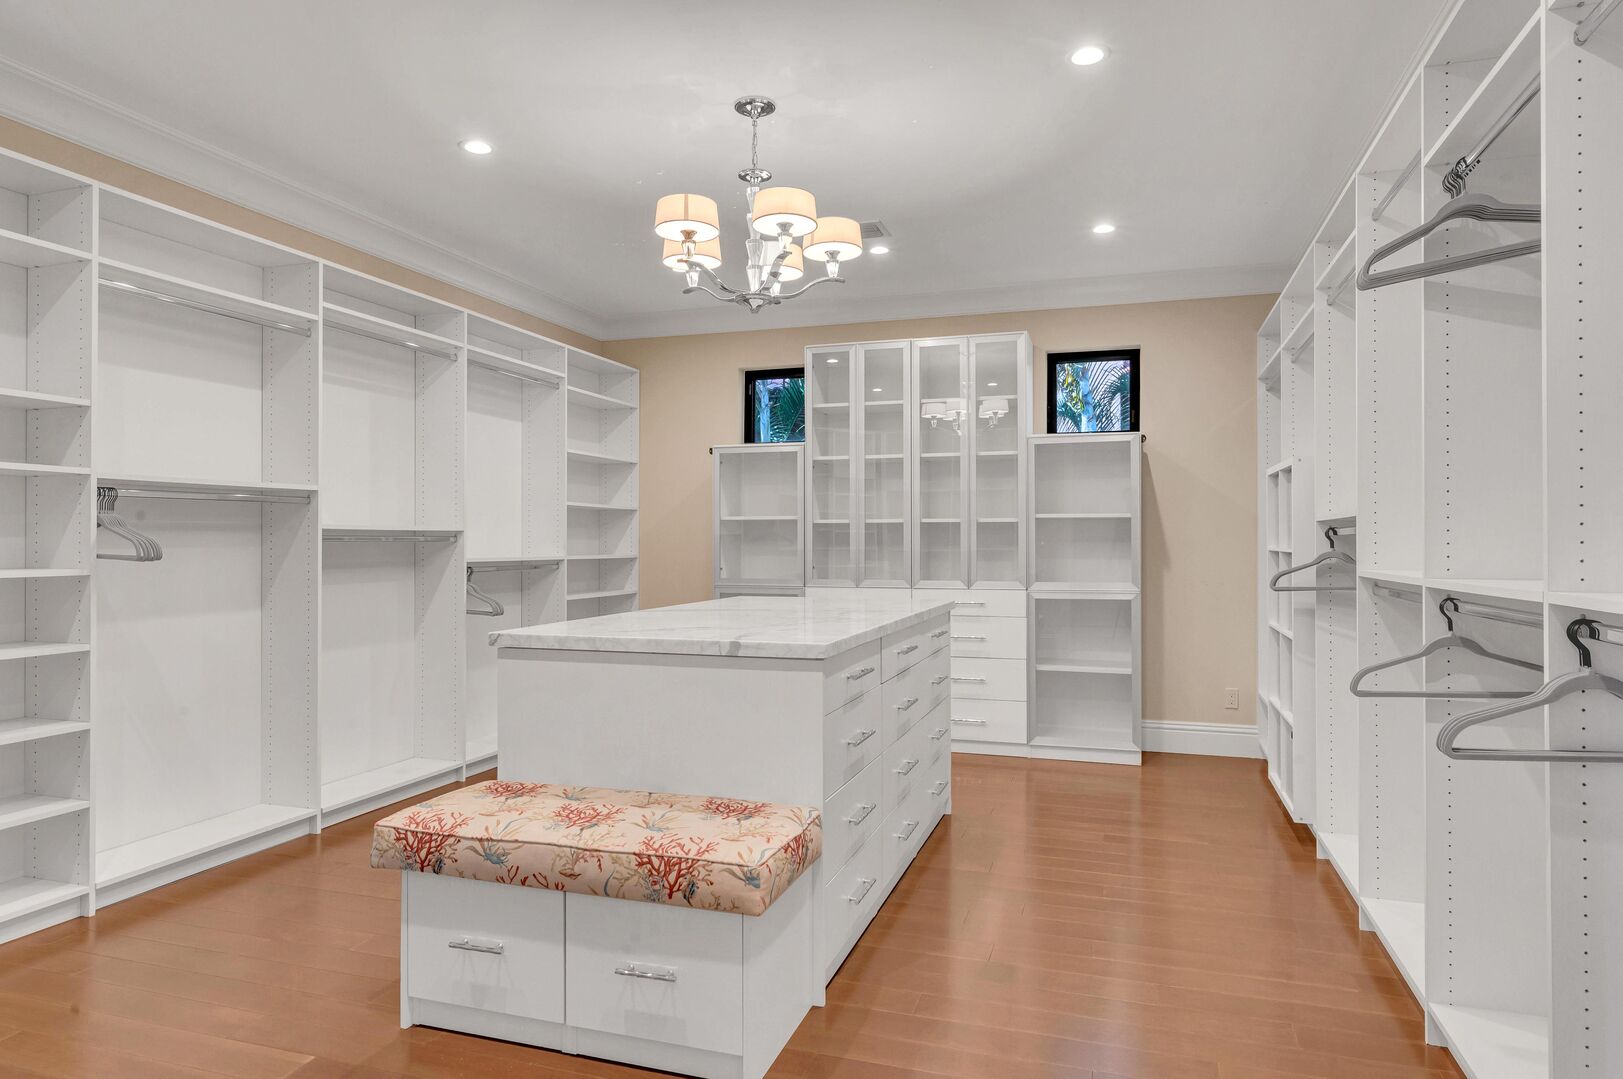 The primary closet features plenty of space.